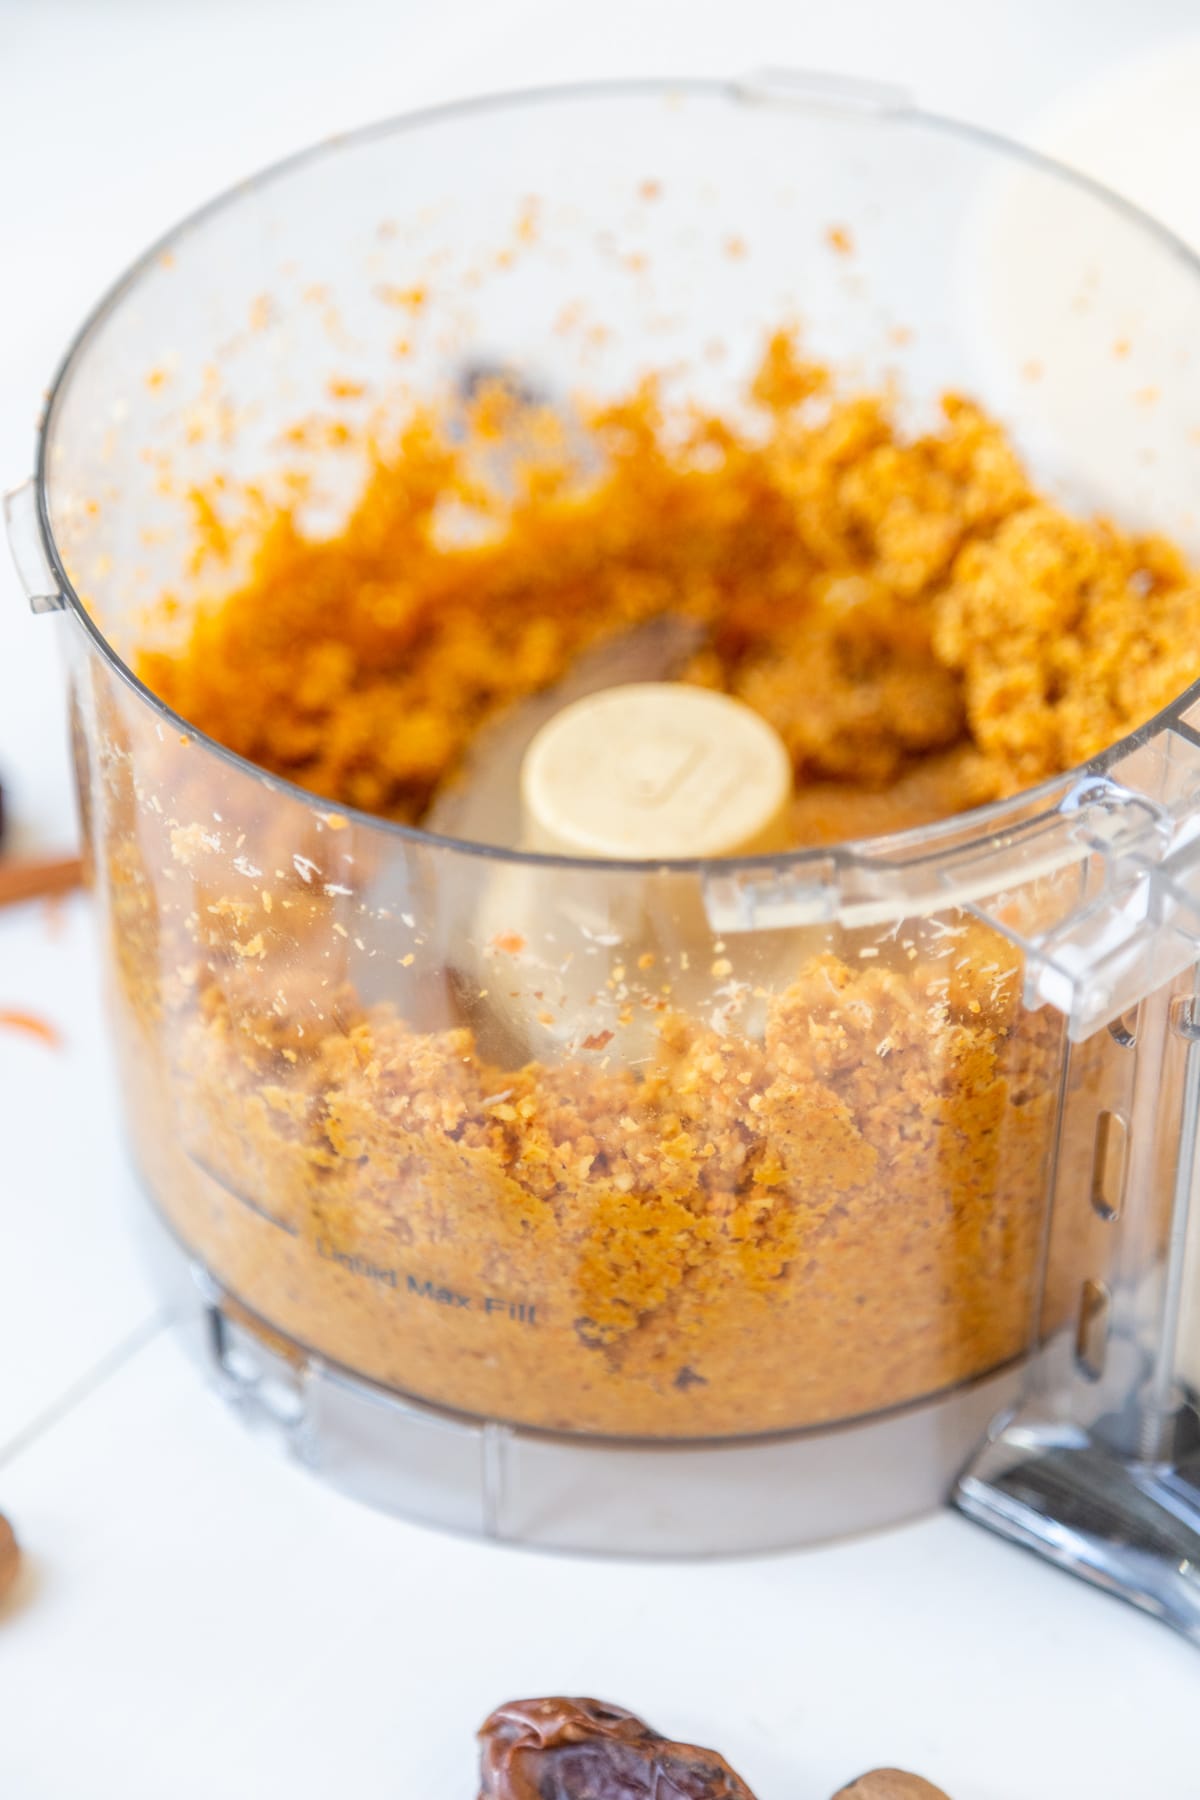 A food processor with ground ingredients for carrot bites.